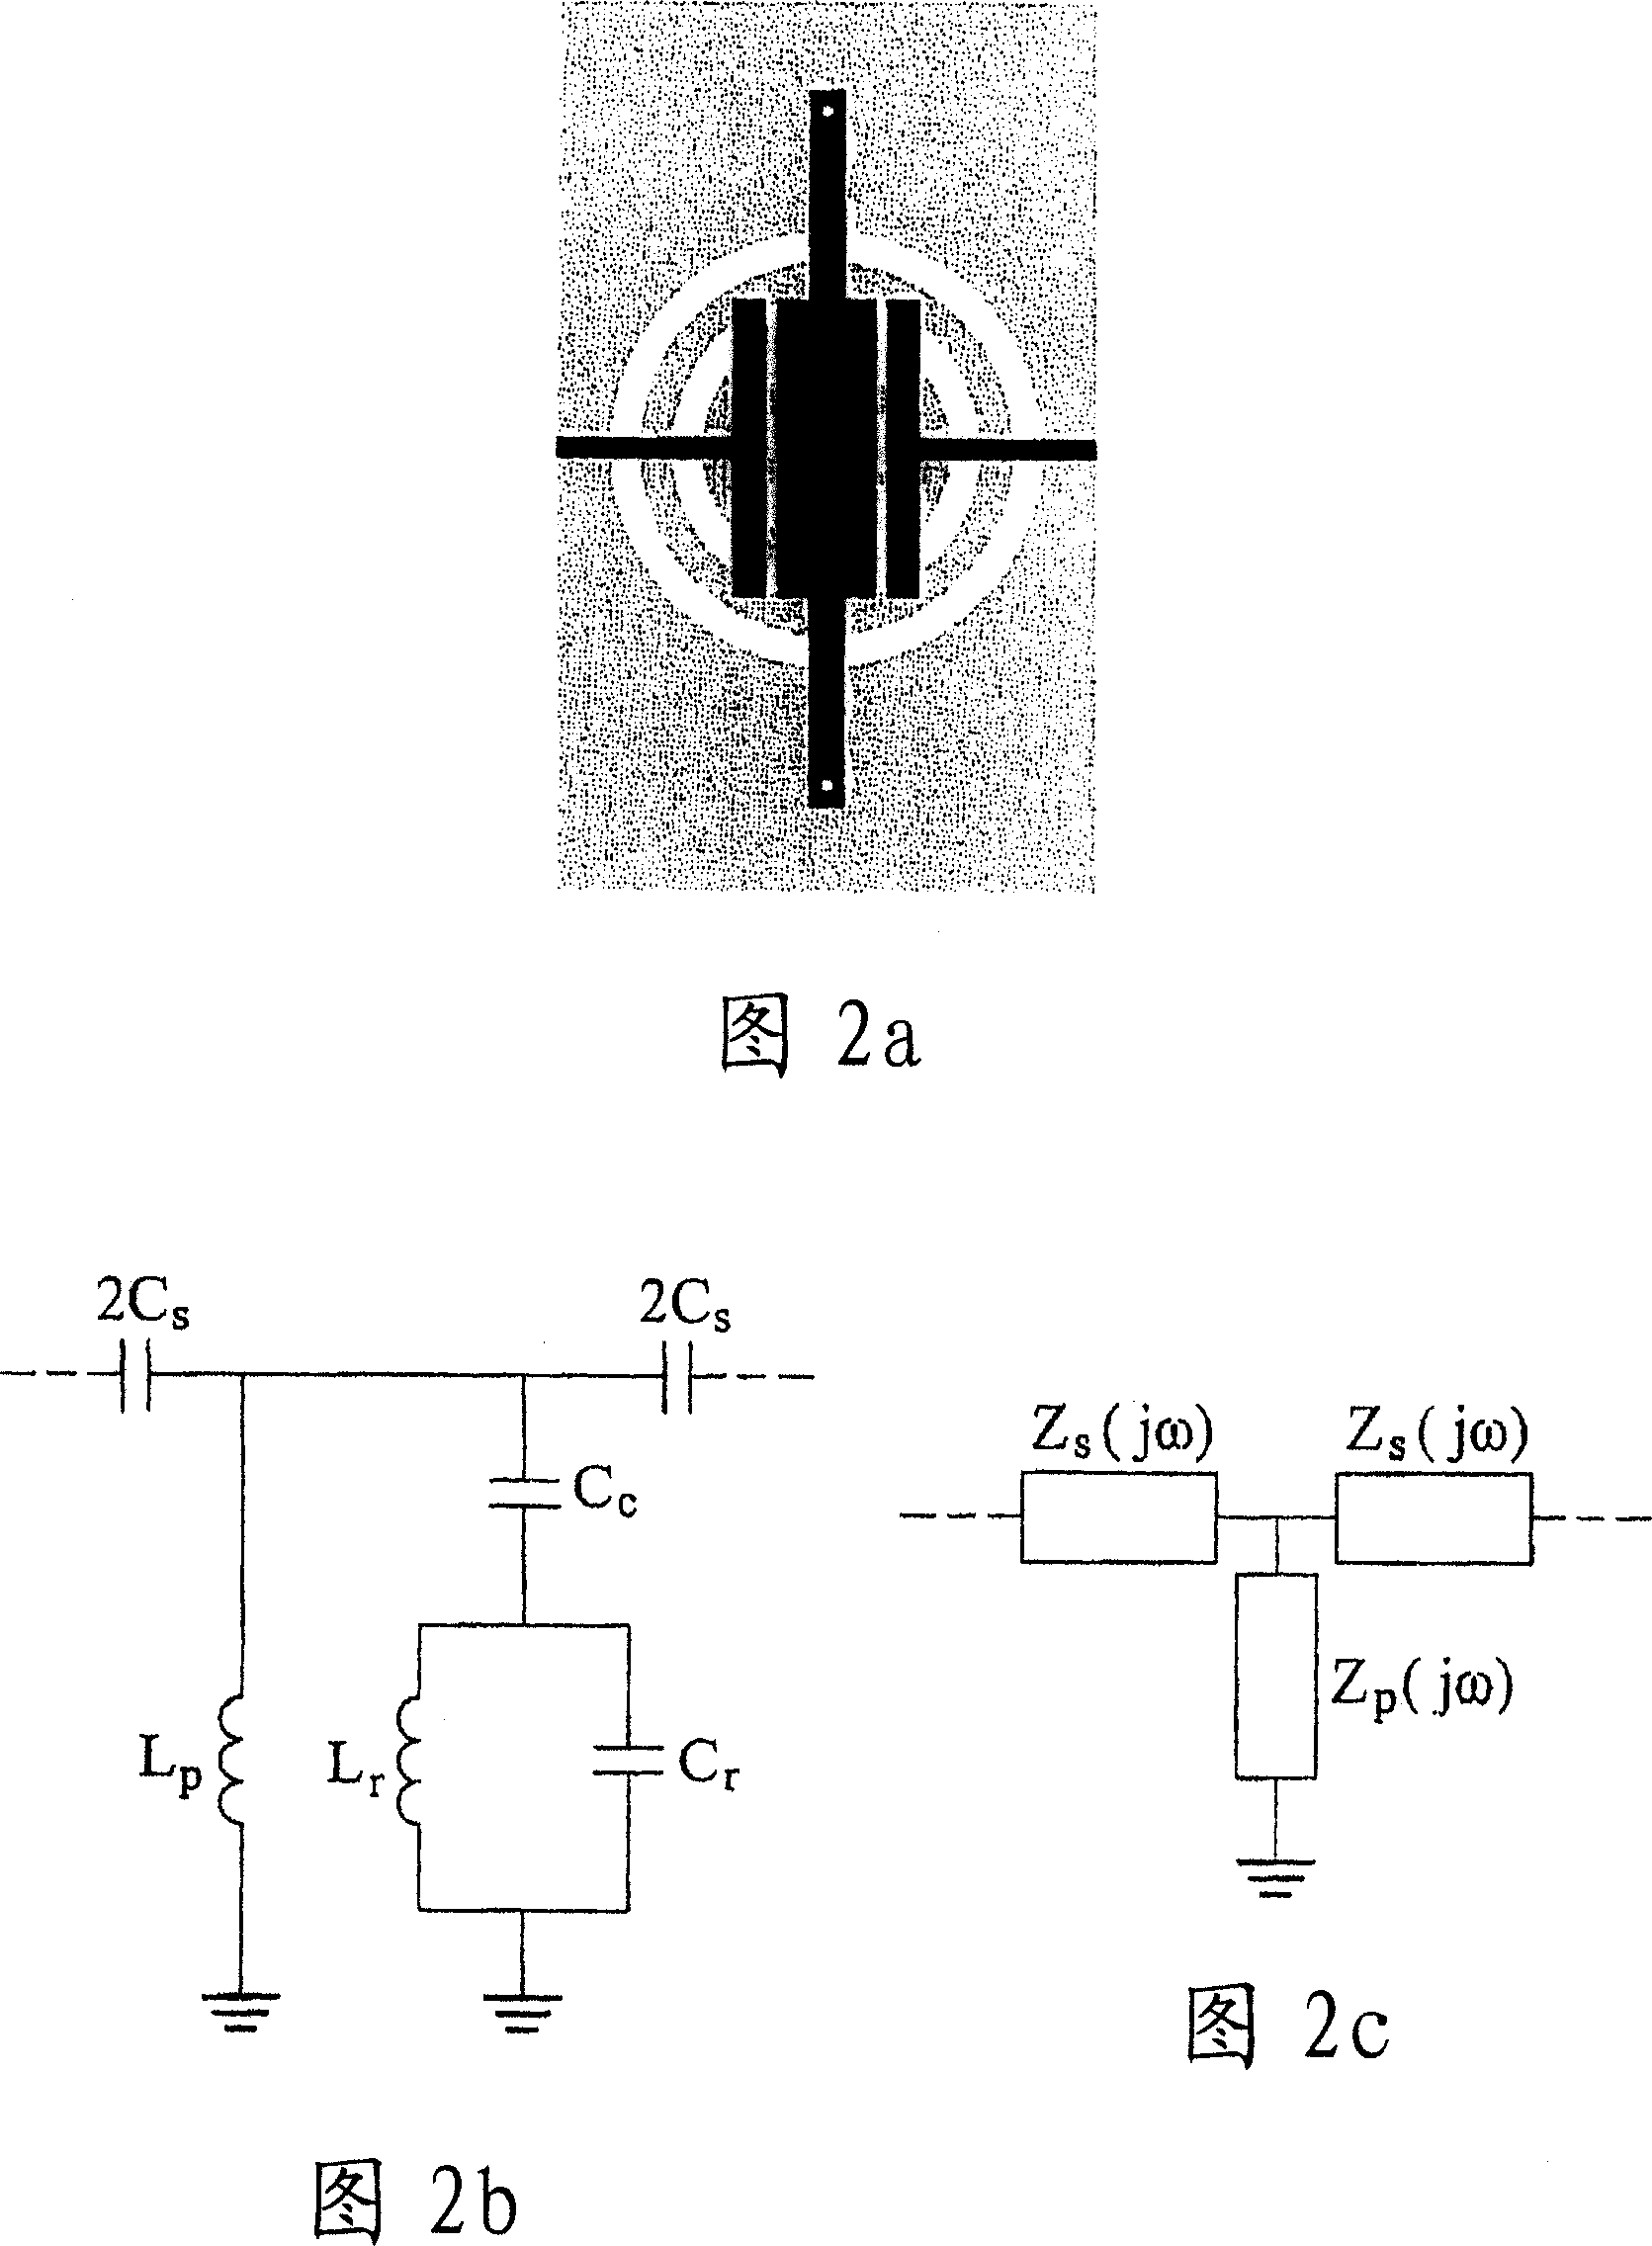 Split ring resonator bandpass filter, electronic device including said bandpass filter, and method of producing said bandpass filter